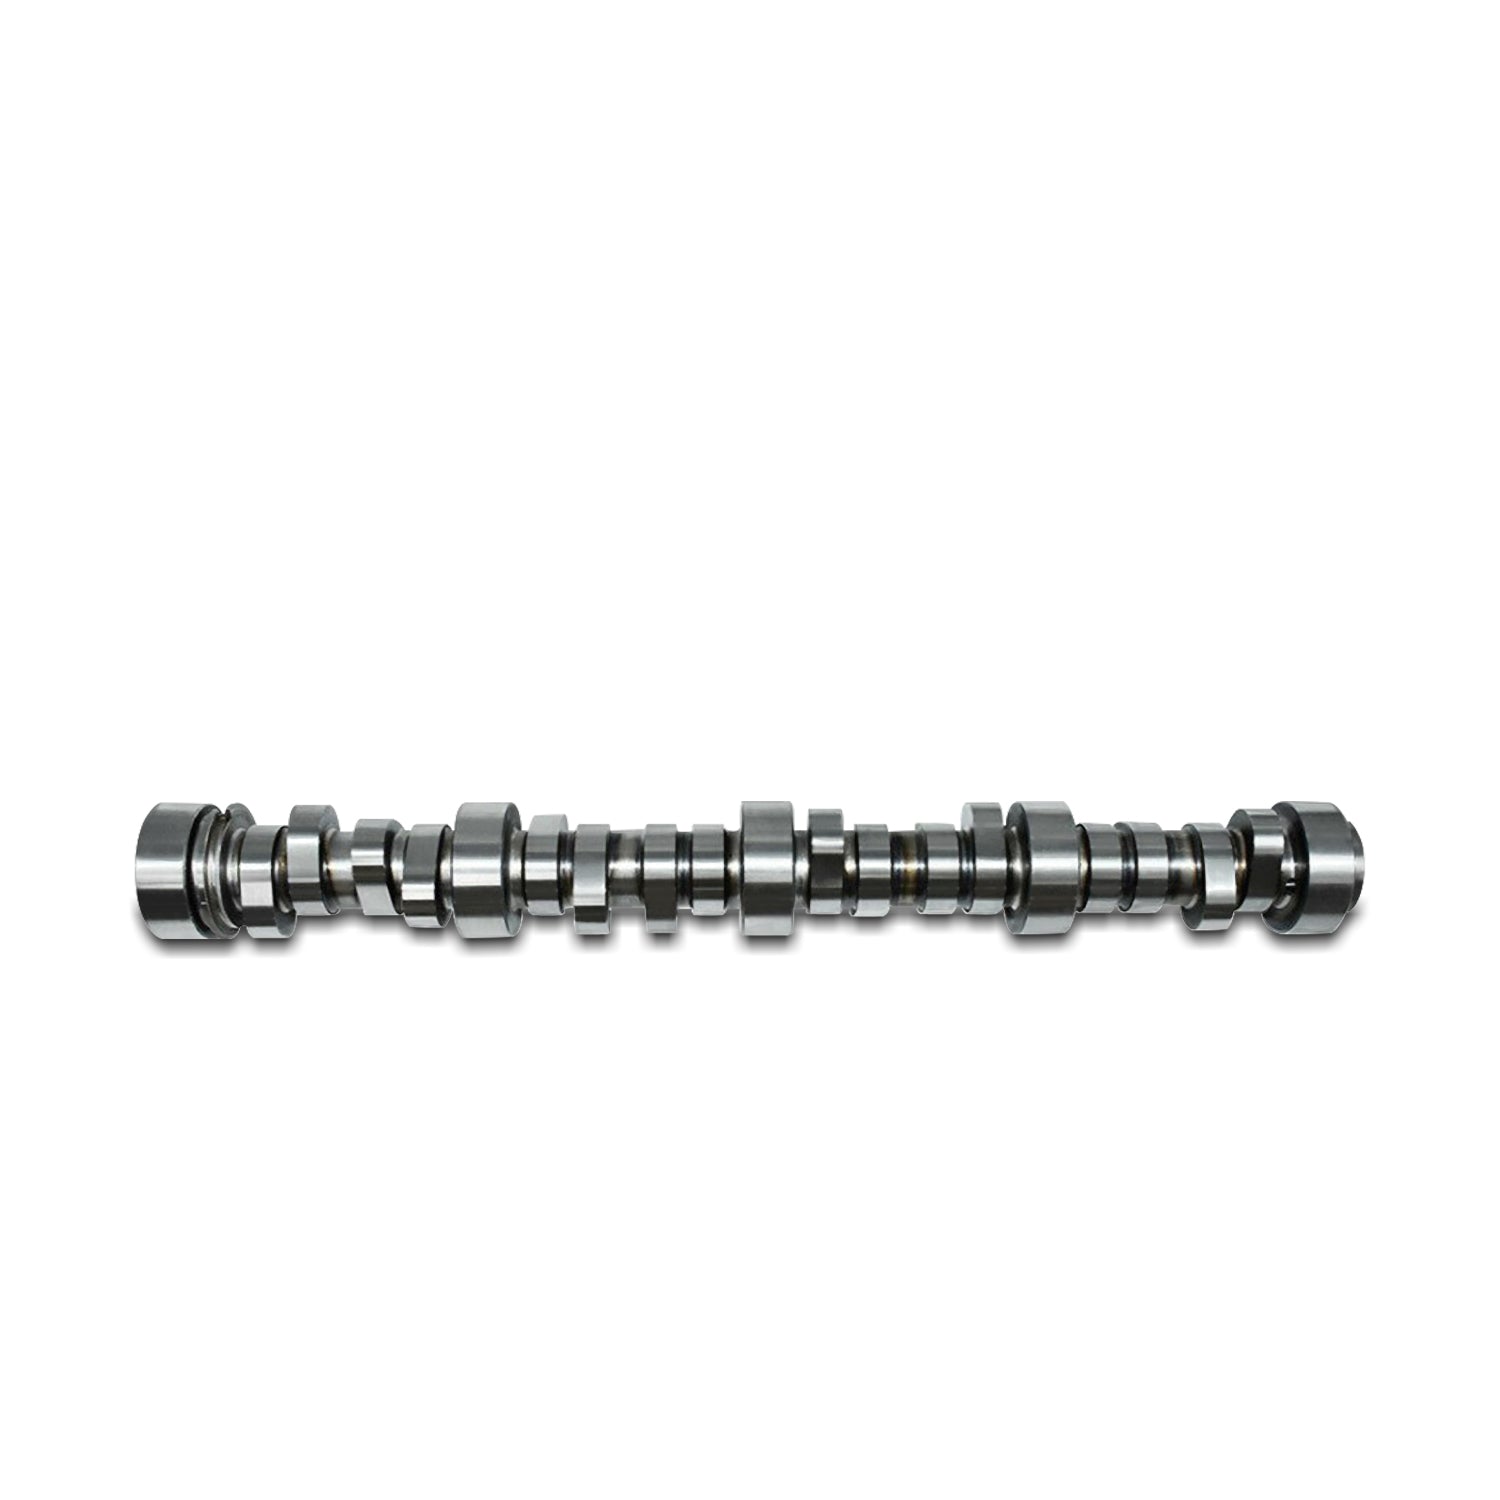 Camshaft E-1841-P Sloppy Stage 3 for Chevy LS LS1 .595" Lift 296° Duration